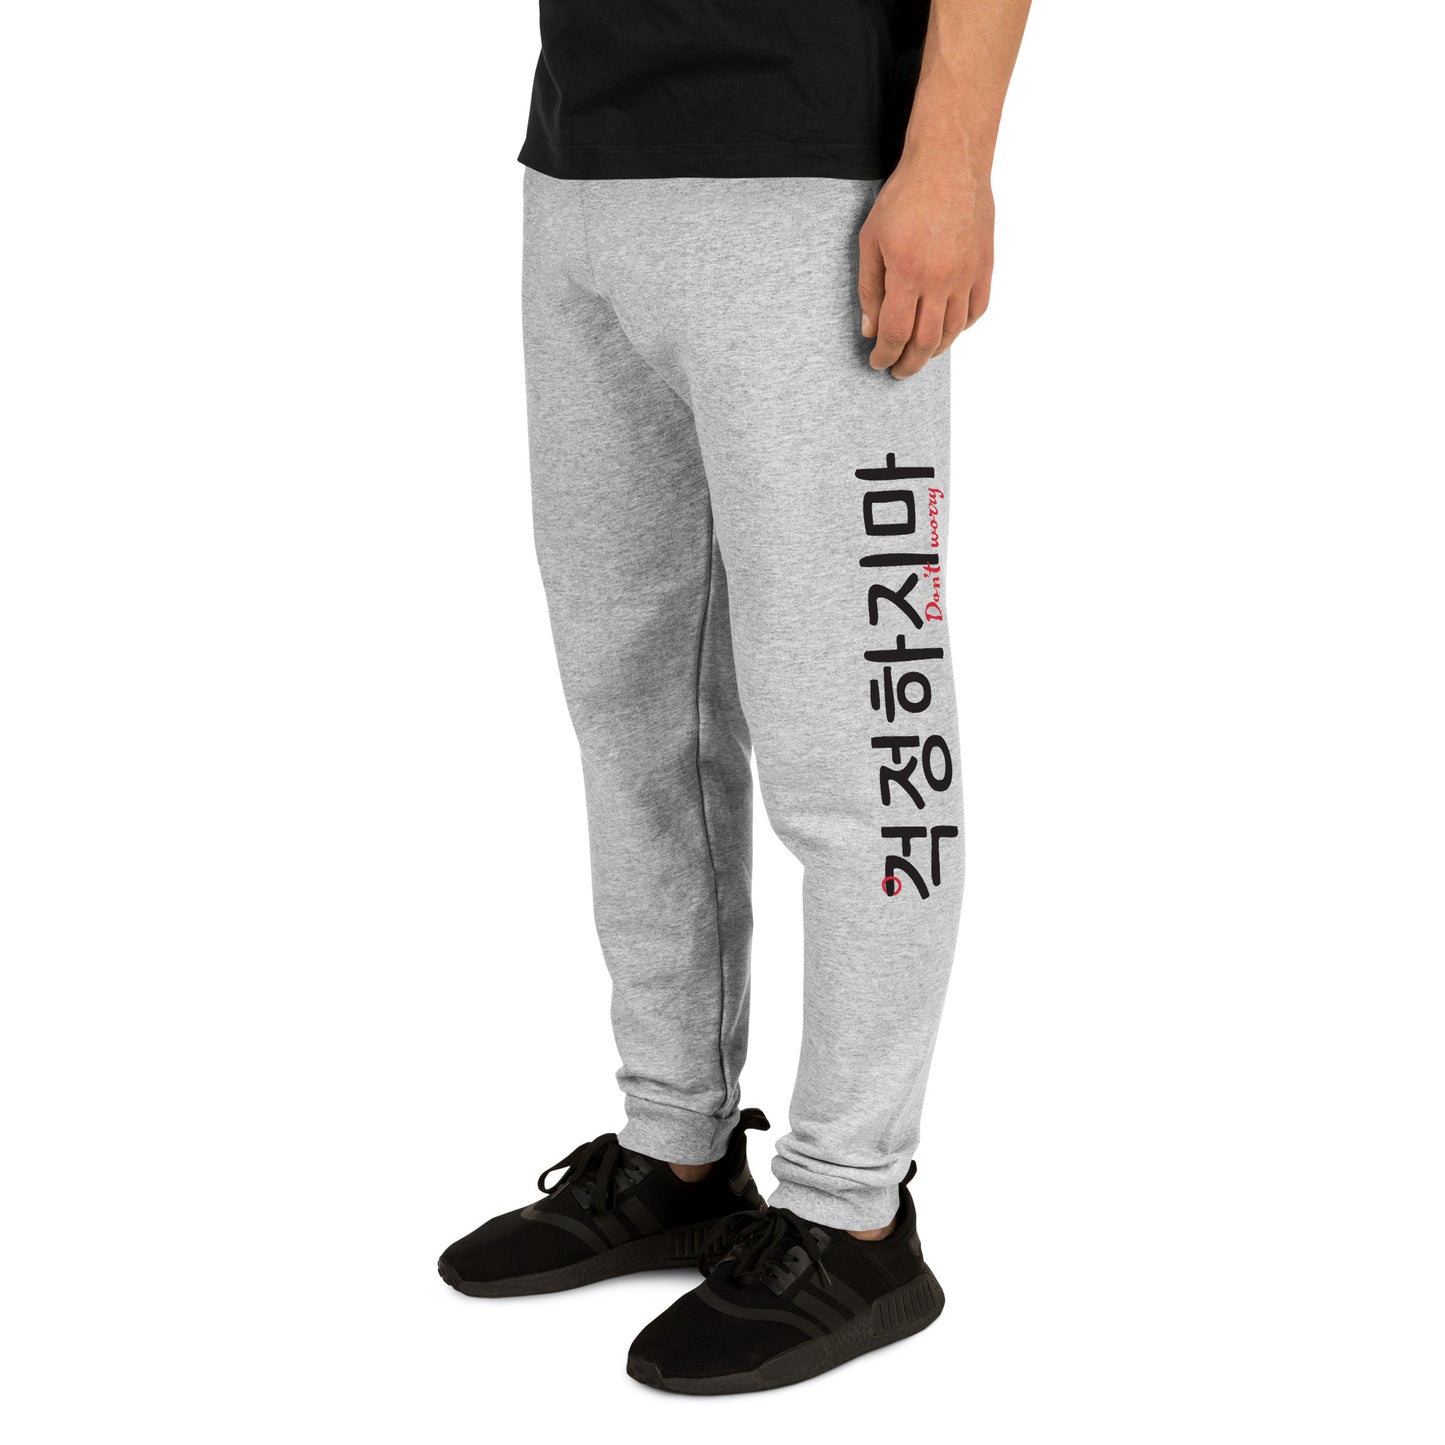 Grey heather pair of joggers with large print on the left leg saying 'Don't worry' in English and Hangul